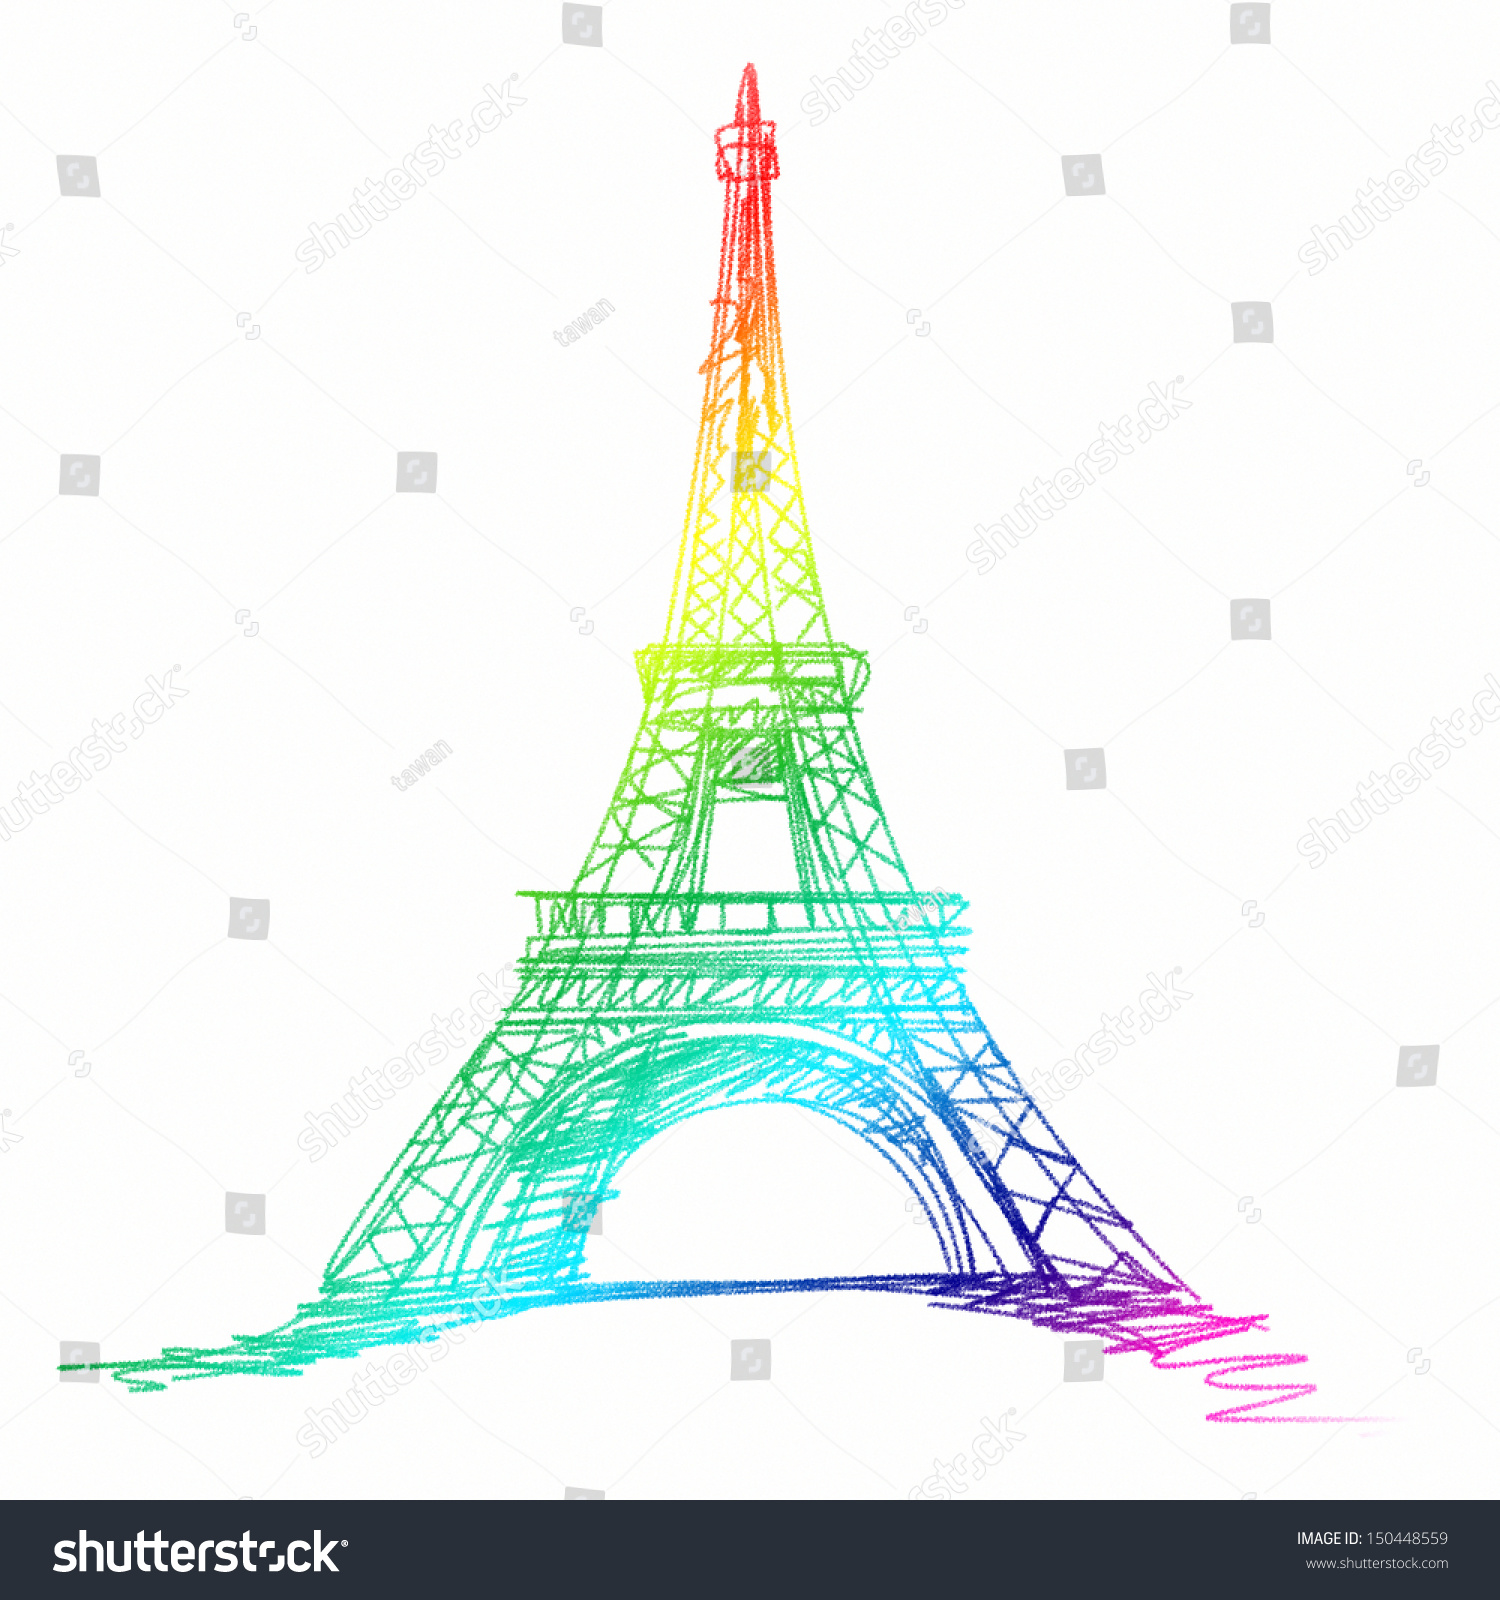 Colorful Eiffel Tower In Paris , Europe Stock Photo 150448559 ...